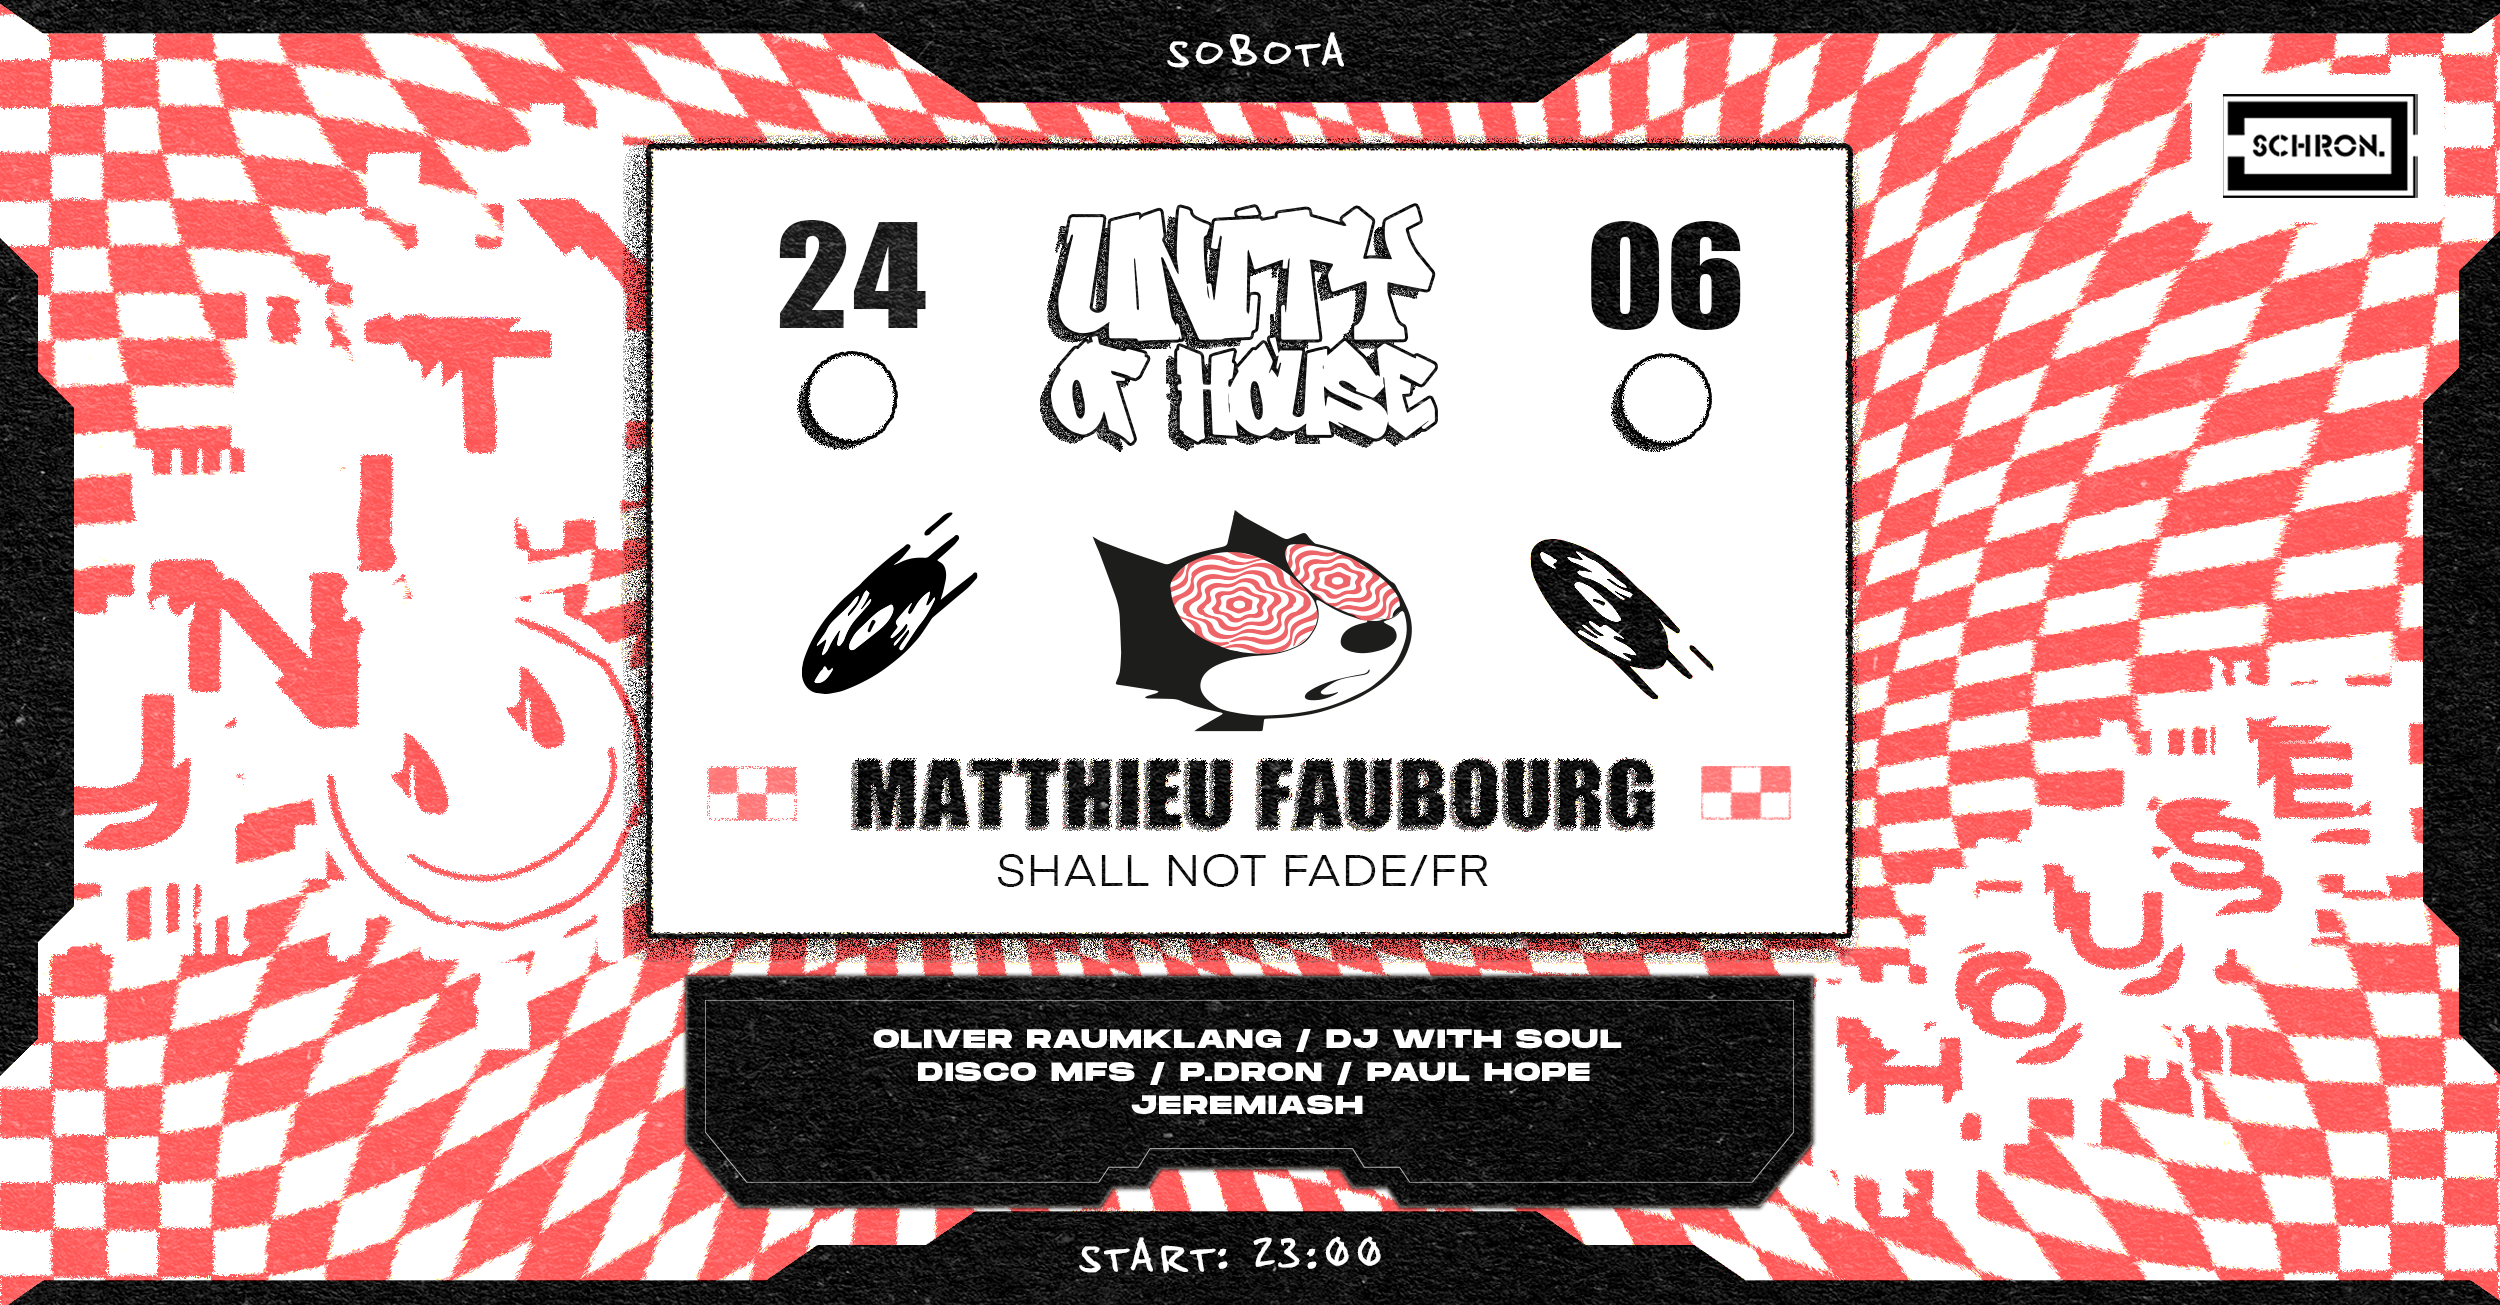 UNITY OF HOUSE with Matthieu Faubourg, Oliver Raumklang, DJ with Soul + more - フライヤー表